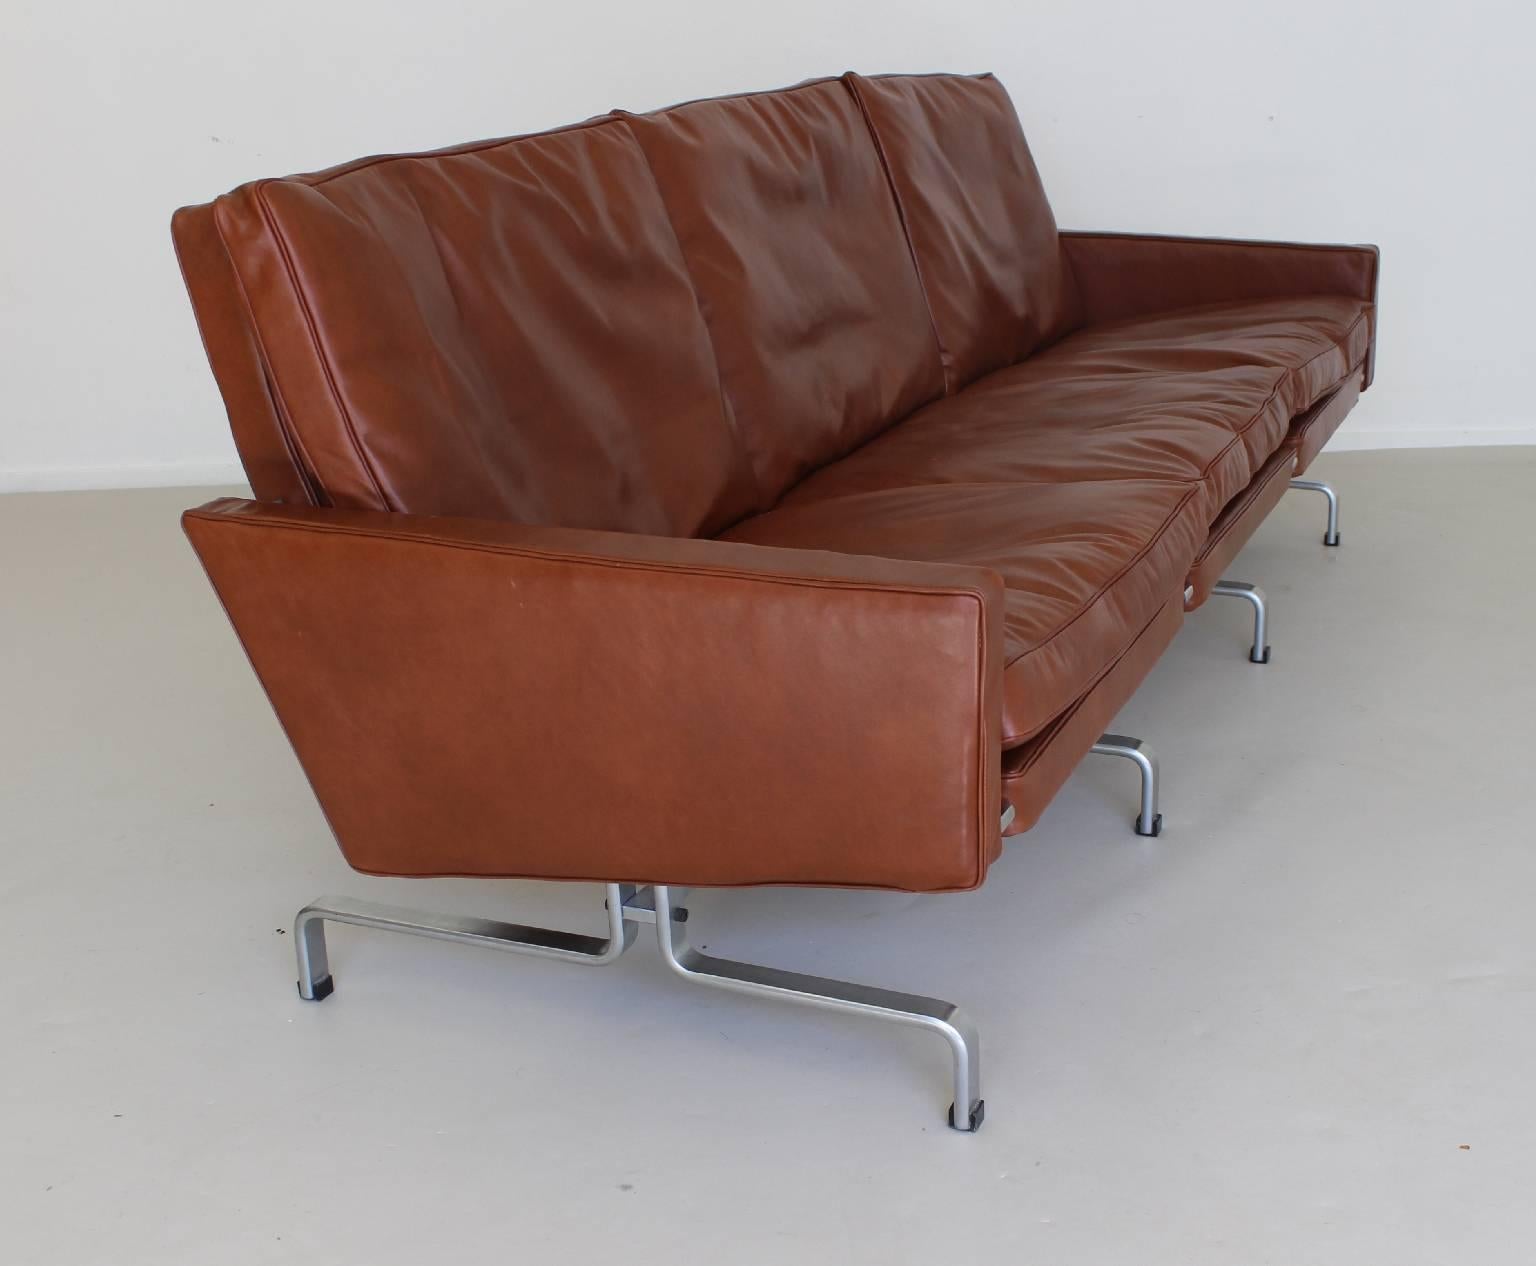 Beautiful executive design seating by Poul Kjaerholm.
Re upholstered in Ohmann classic saddle leather.
Steel manufacturer E Kold Christiansen.
A real masterpiece in excellent condition

 